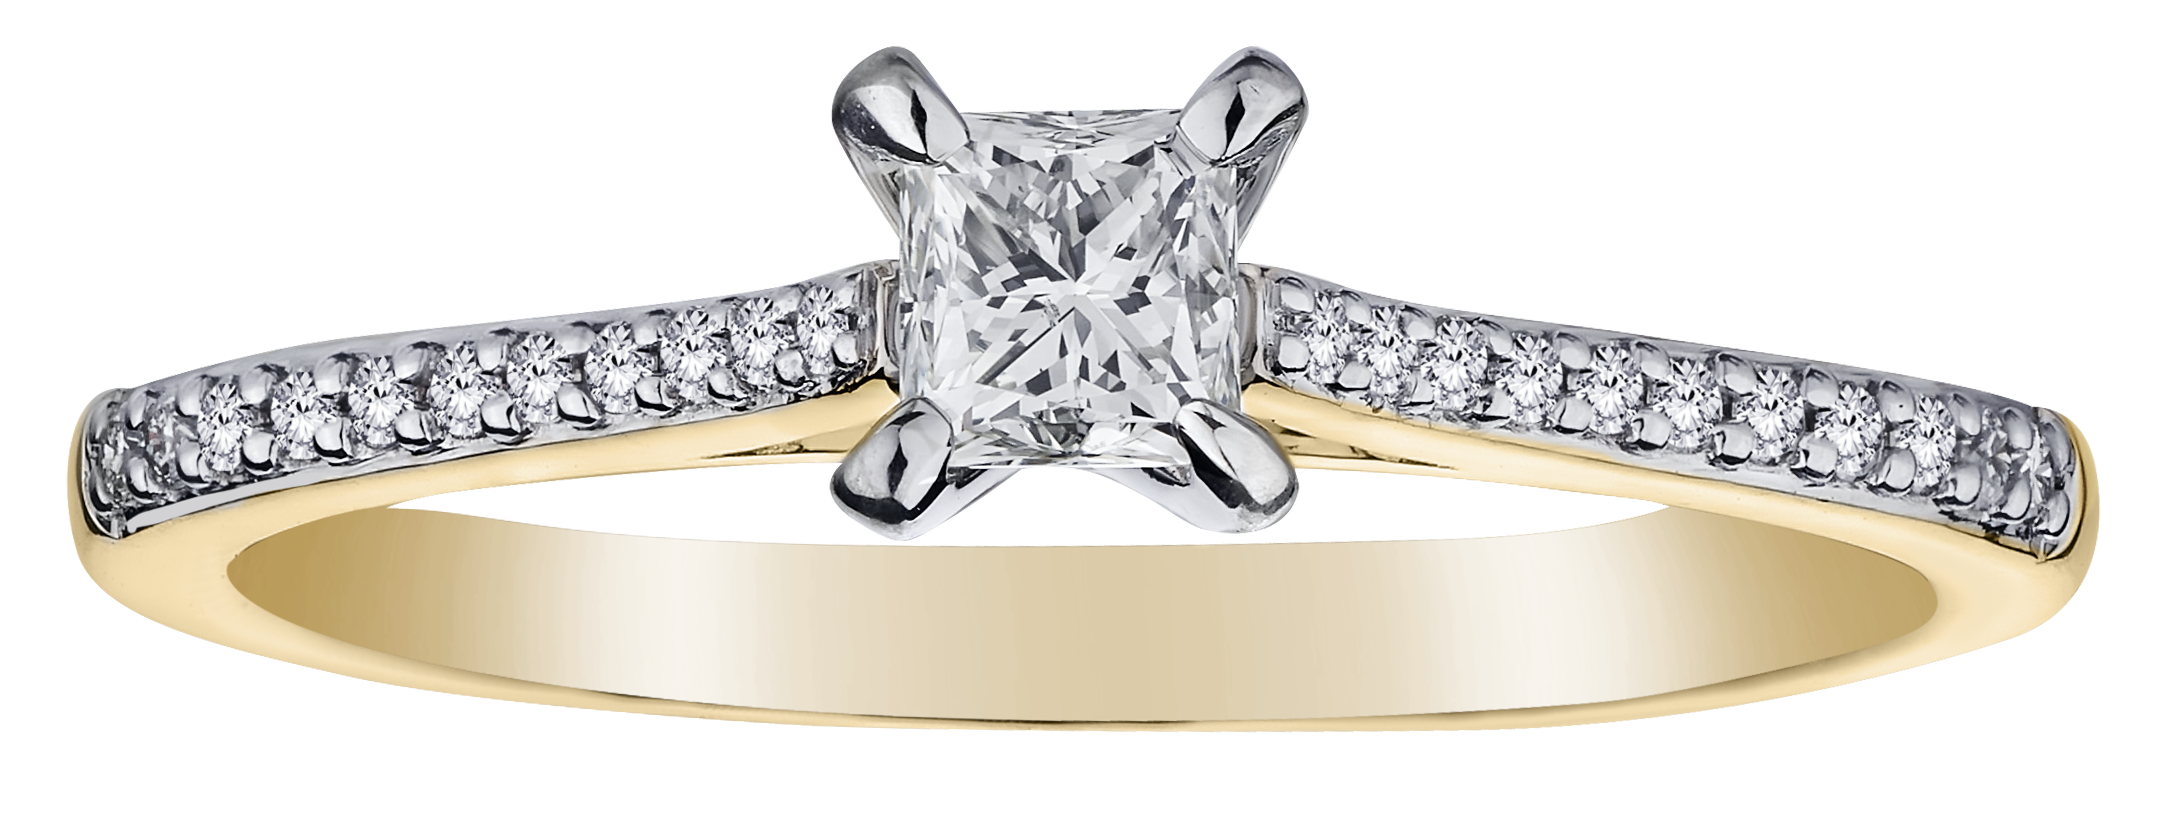 product photo of .65 Carat of Canadian Diamonds  "Princess" Engagement Ring,  10kt Yellow Gold & White Gold from Griffin jewellery designs